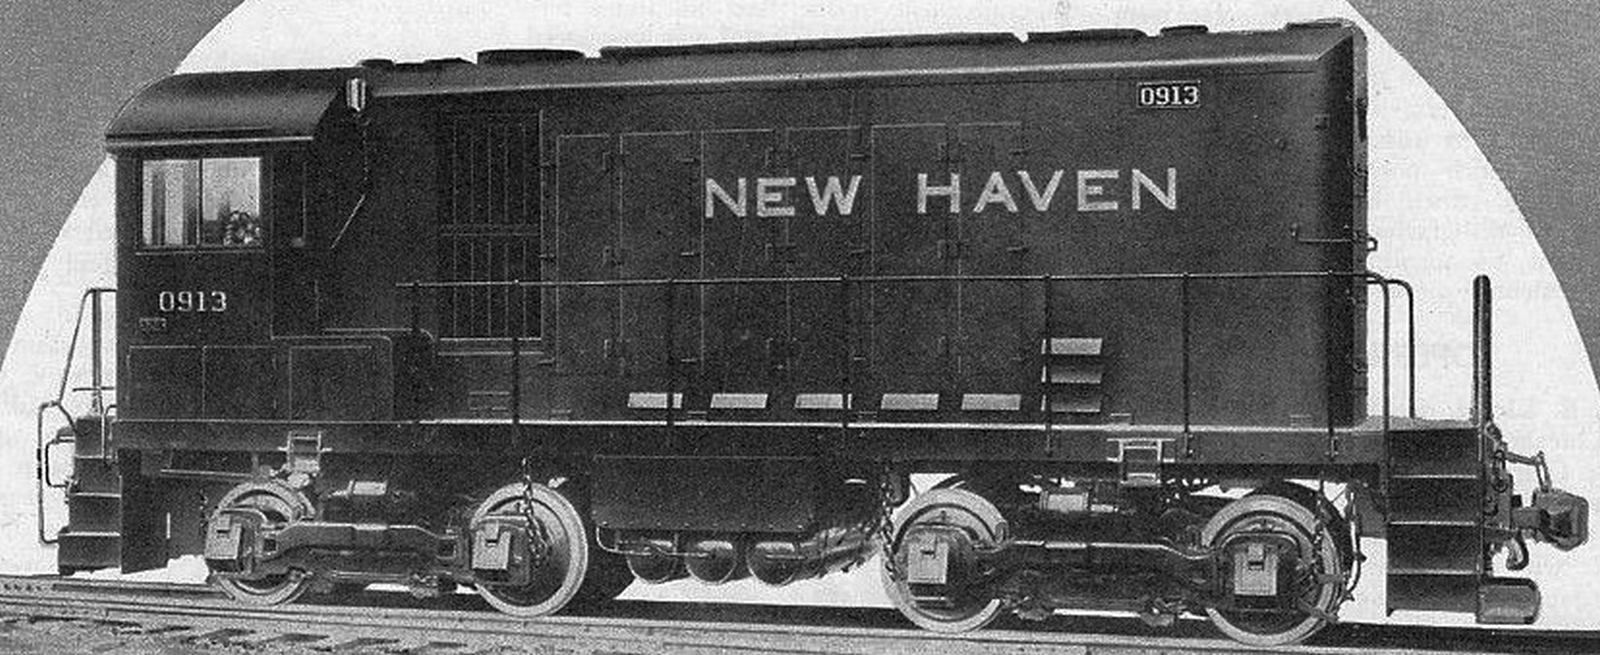 HH600 No. 913 of the New Haven on a 1938 ALCO advertising brochure